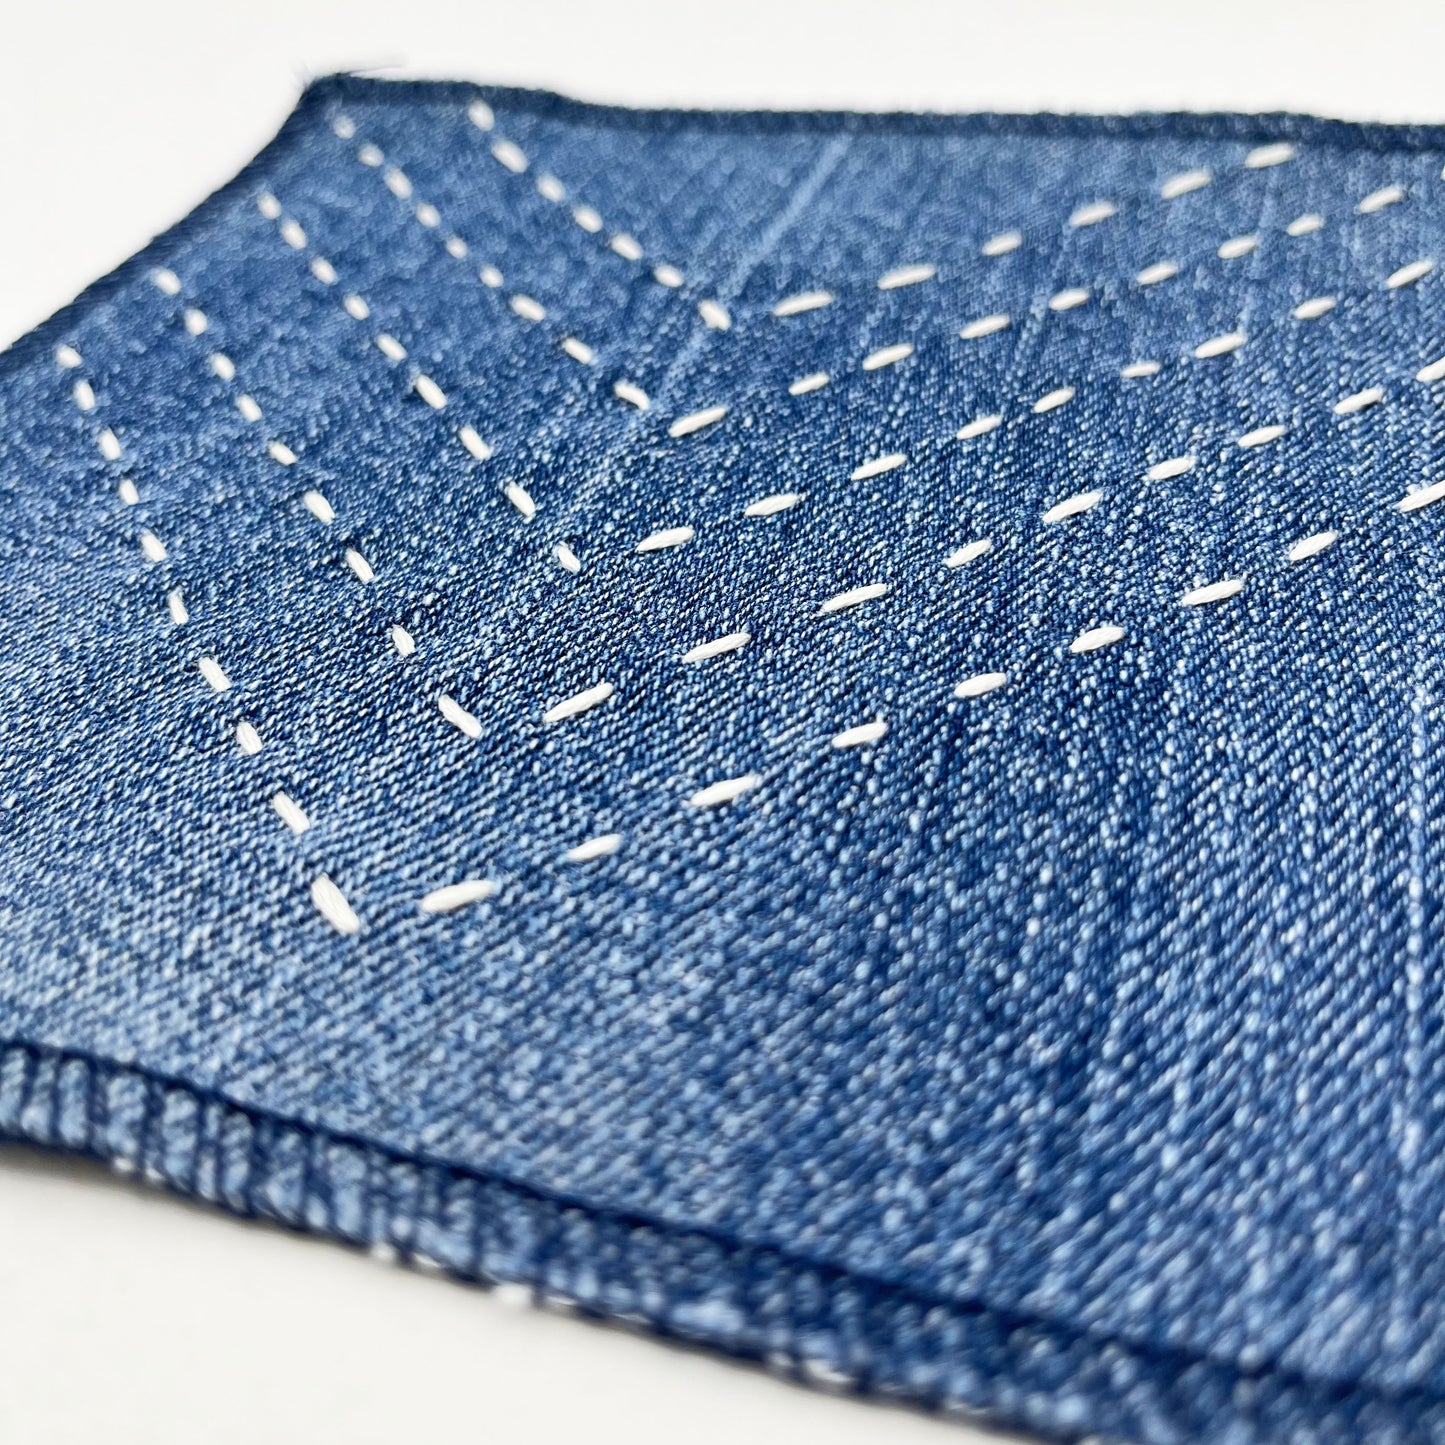 a close up angled view of a square patch made out of denim, handstitched with rows of ivory running stitches in a chevron pattern, with overlocked edges, on a white background